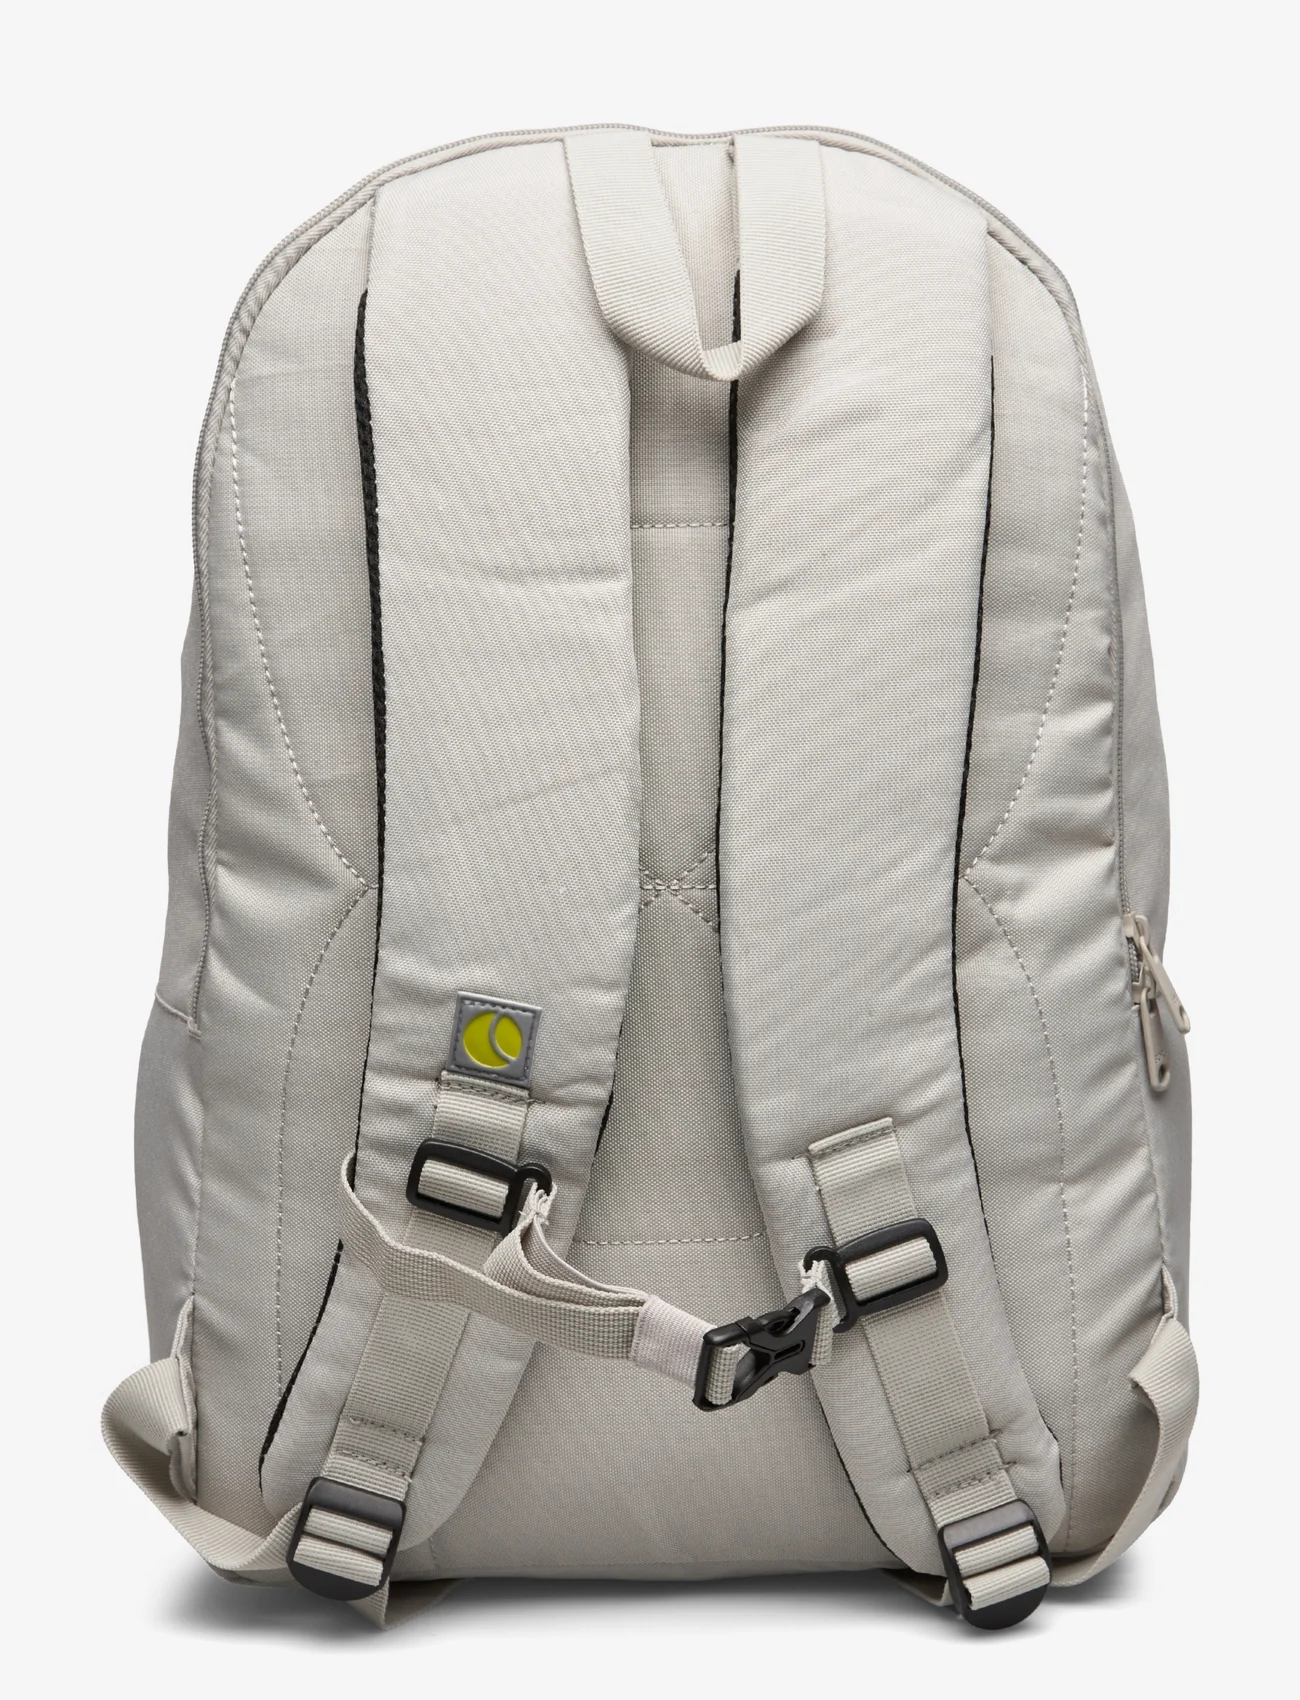 Björn Borg - CORE ICONIC BACKPACK - sommerschnäppchen - drizzle - 1